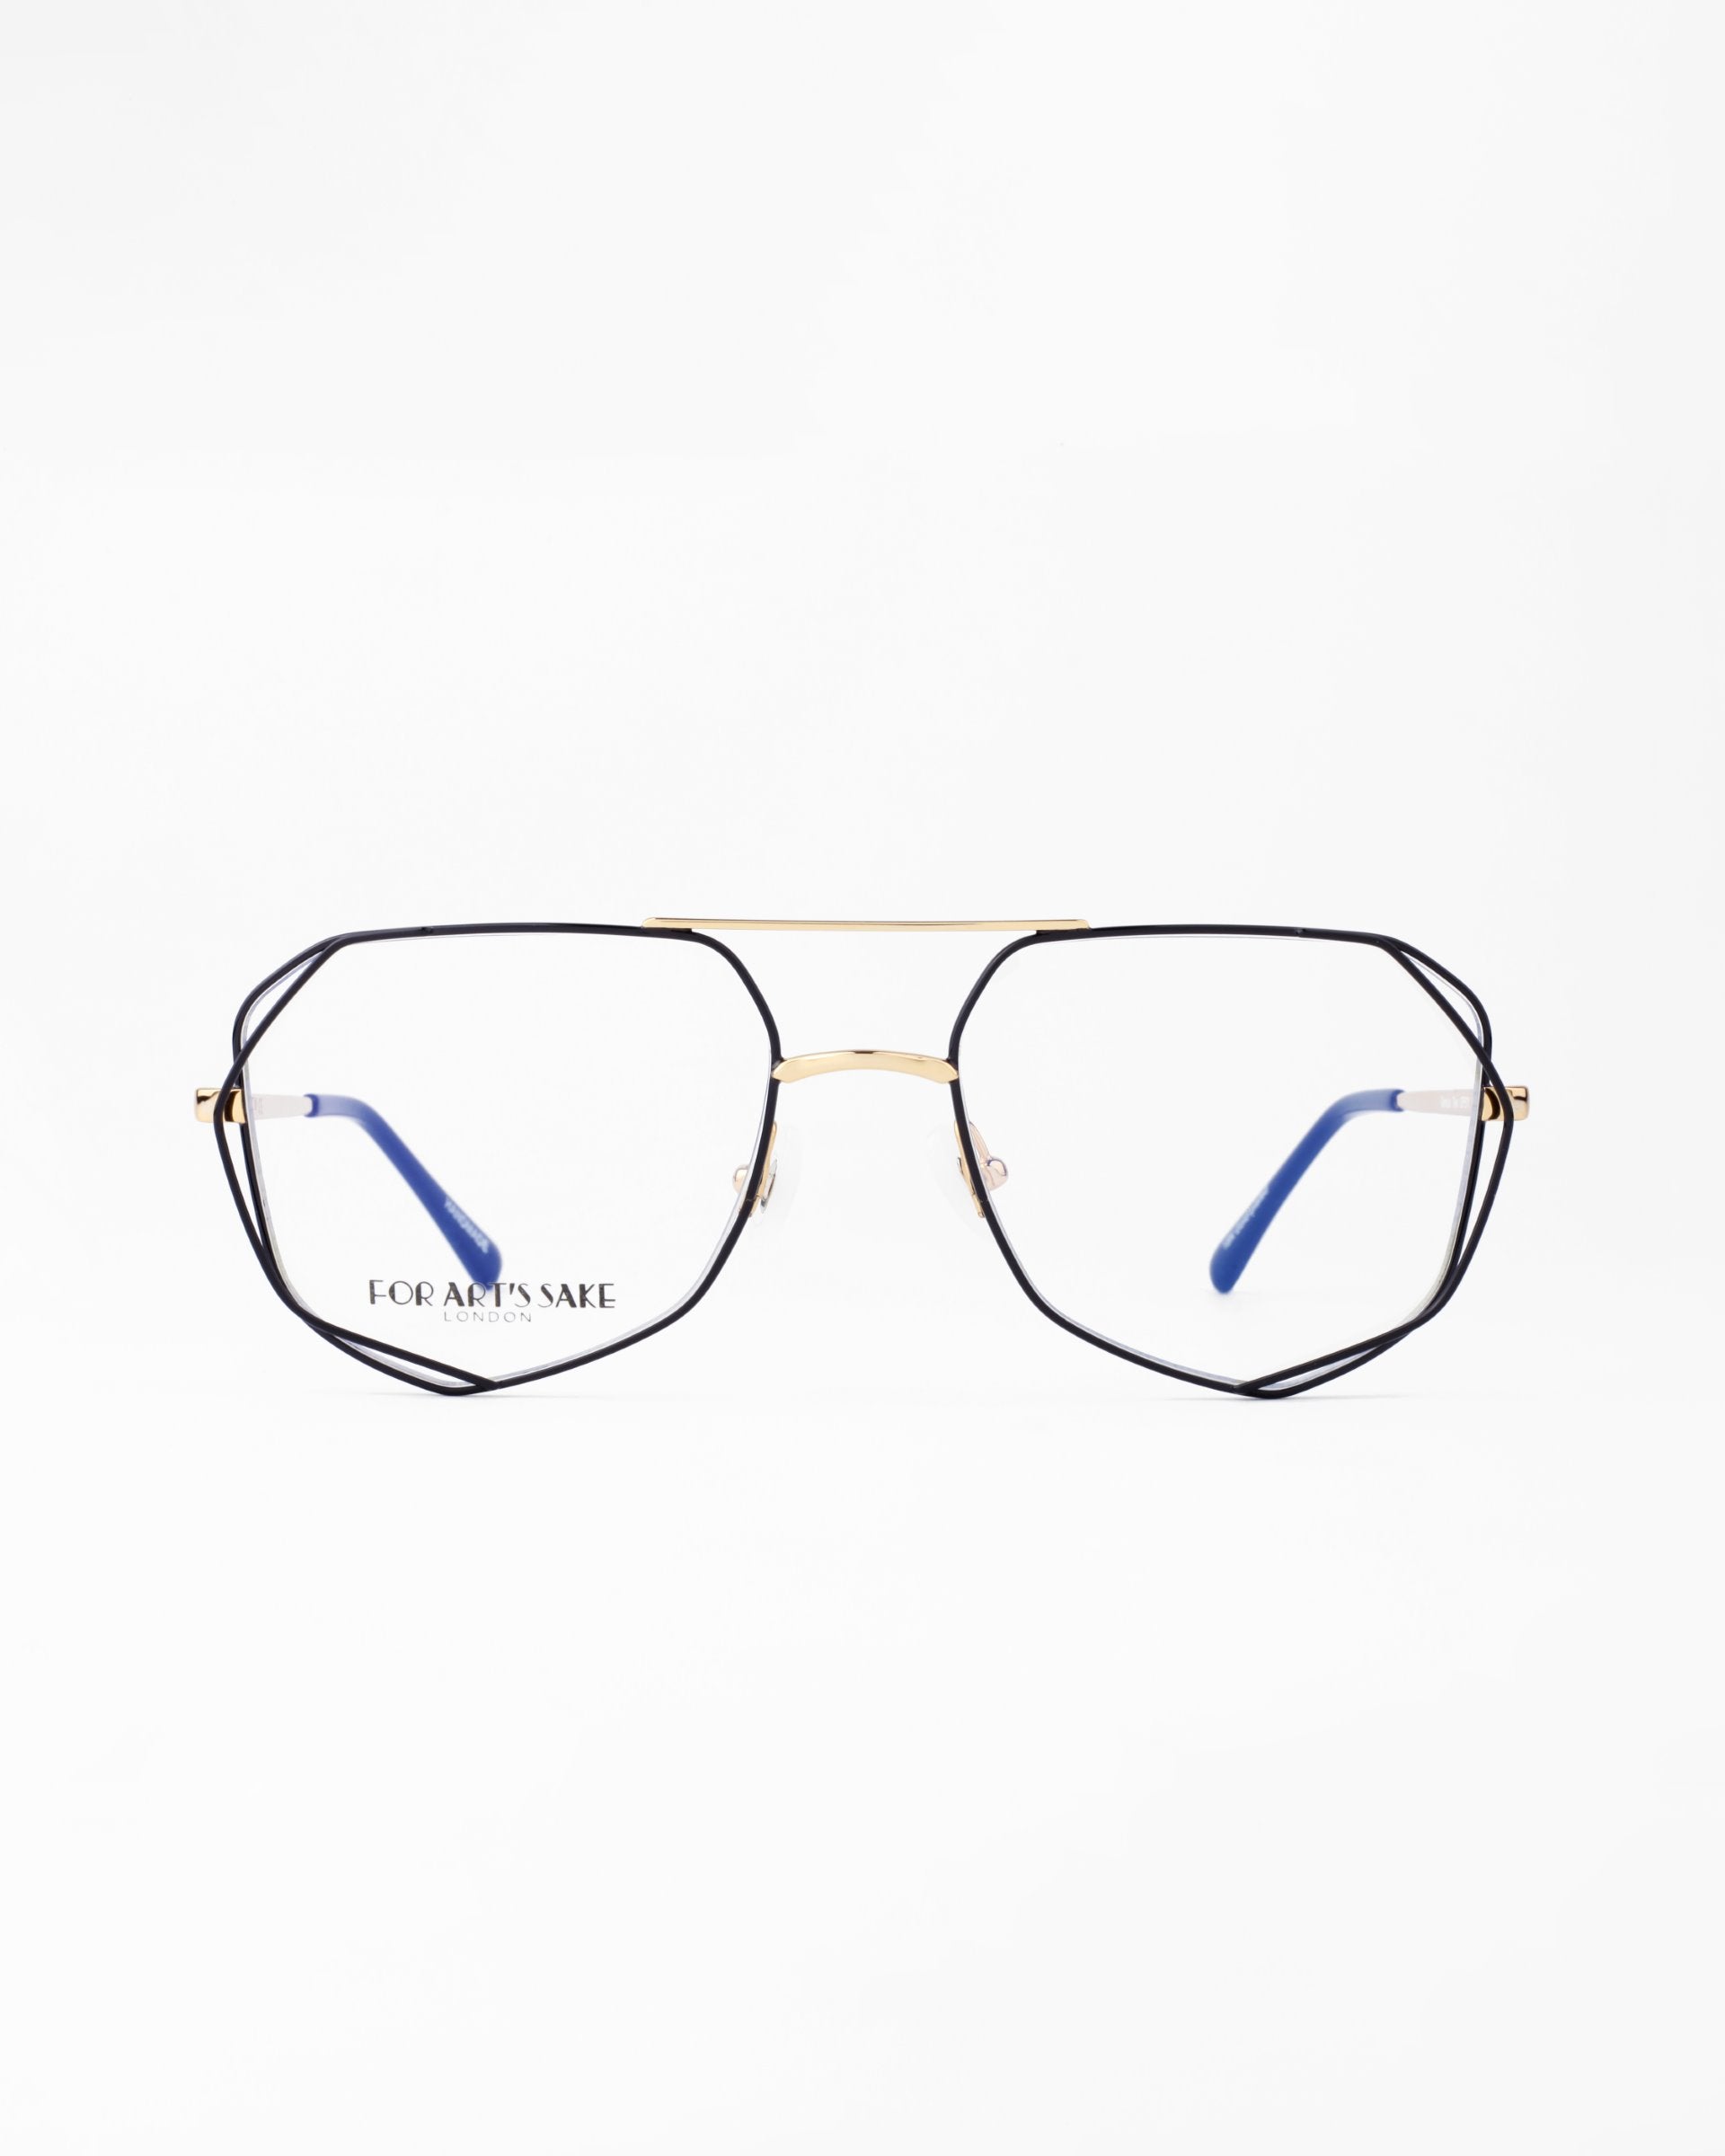 A pair of eyeglasses with hexagonal black frames, gold bridge, and blue-tipped temples is centered against a white background. The brand name &quot;For Art&#39;s Sake®&quot; is visible on the left lens. Featuring a Blue Light Filter, the Genius Two glasses are perfect for digital screen use.